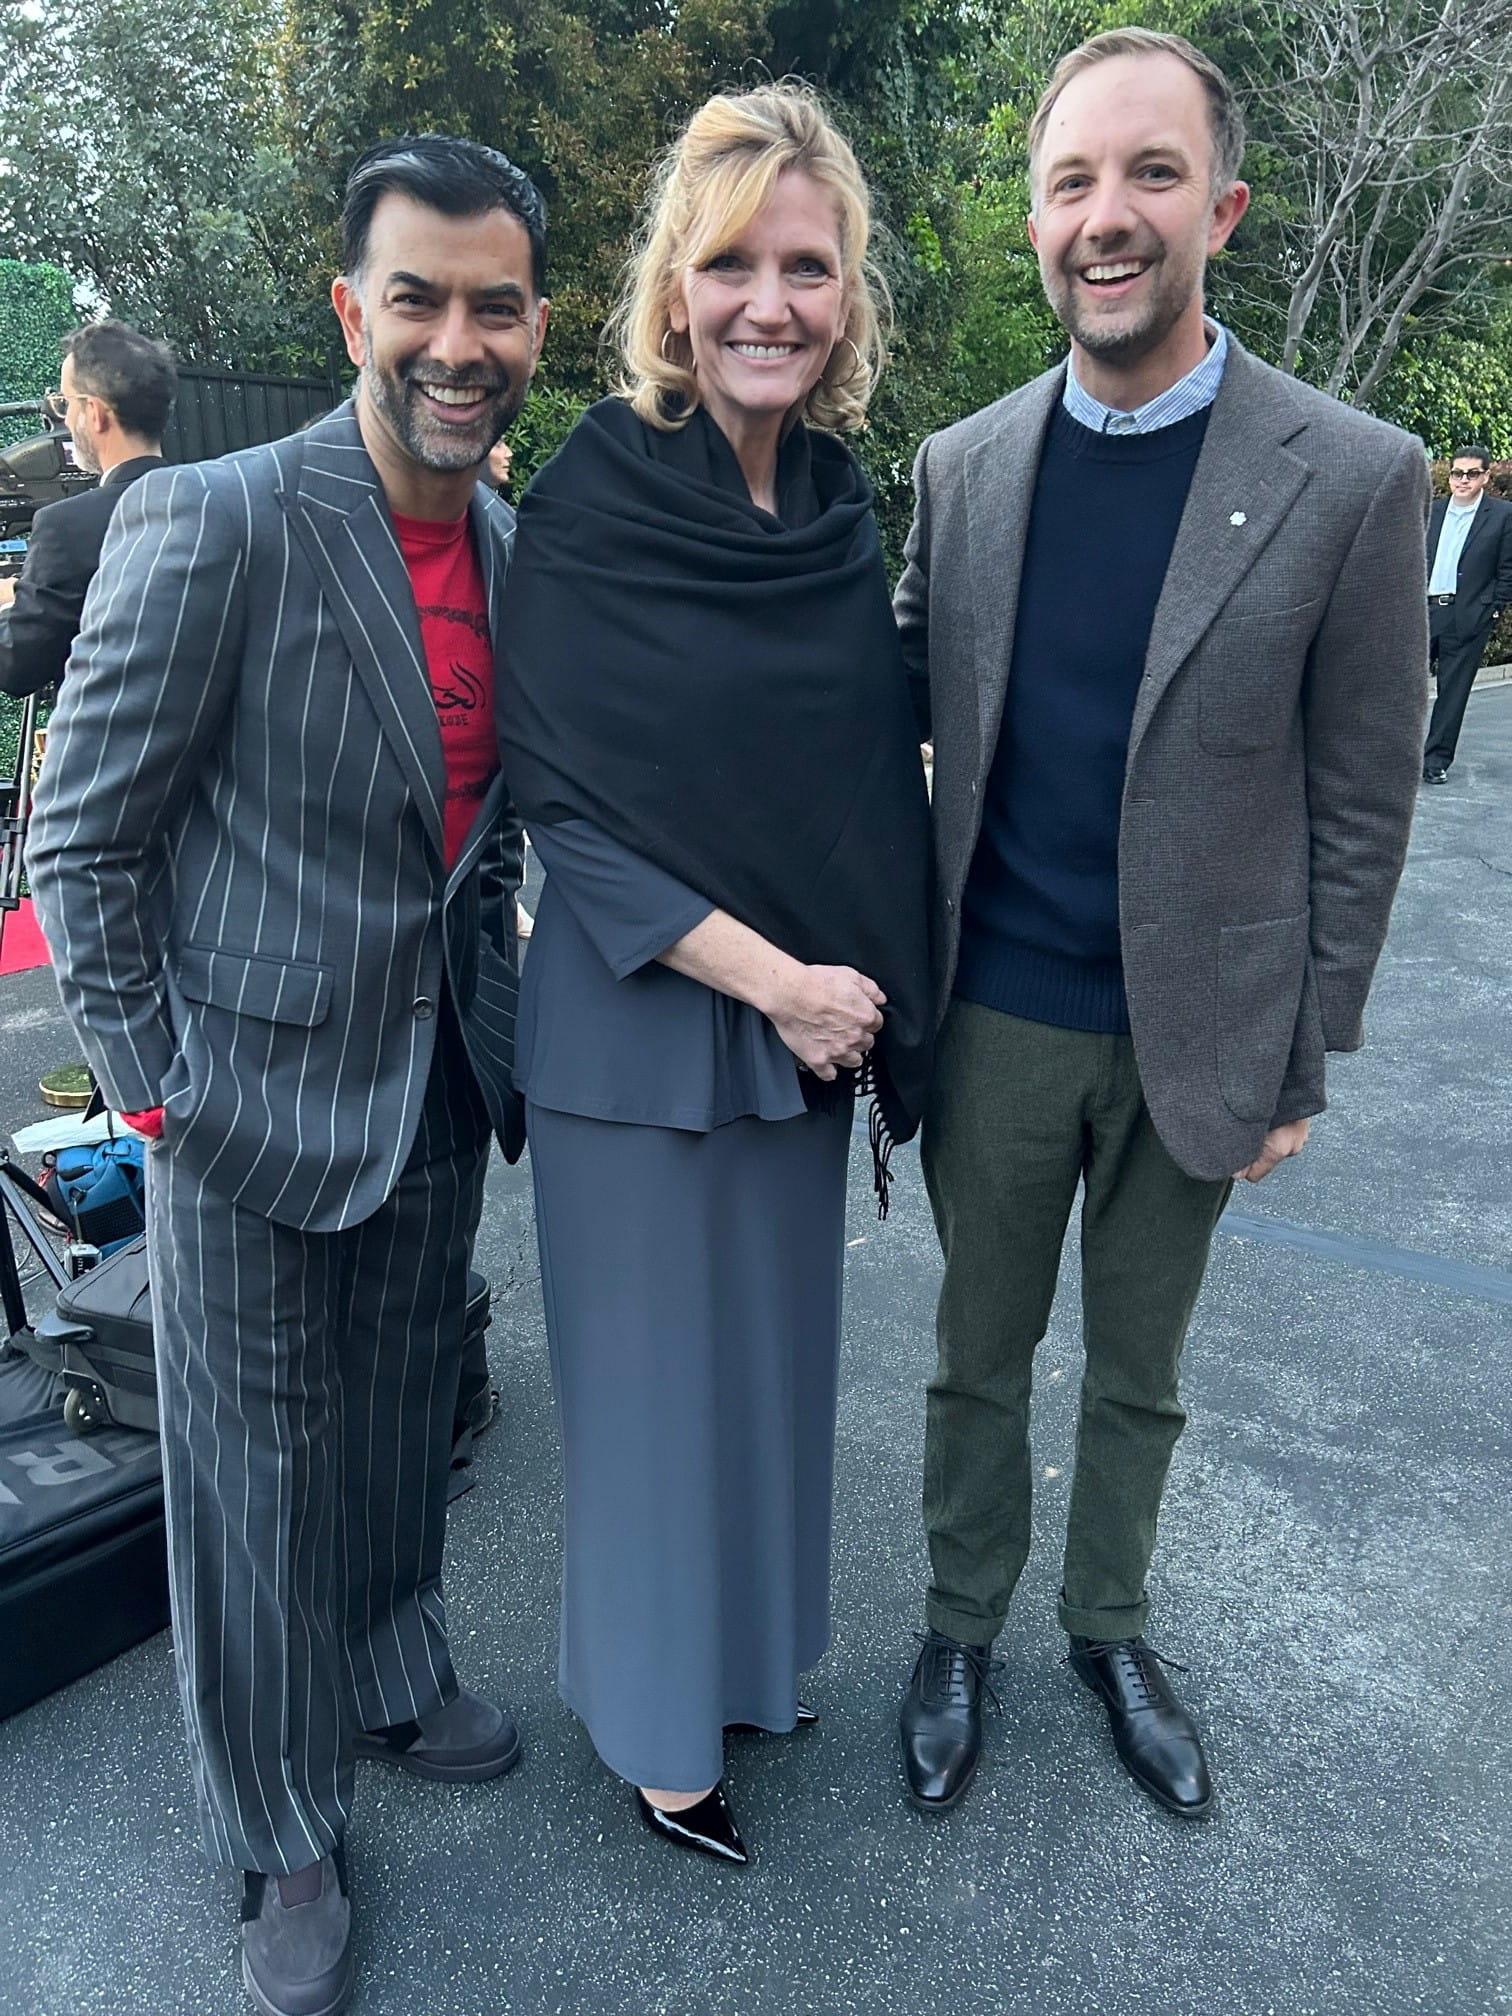 Sheridan President and Vice Chancellor Dr. Janet Morrison stands with Consul General of Canada in Los Angeles Zaib Shaikh and award-winning author Jon Klassen.